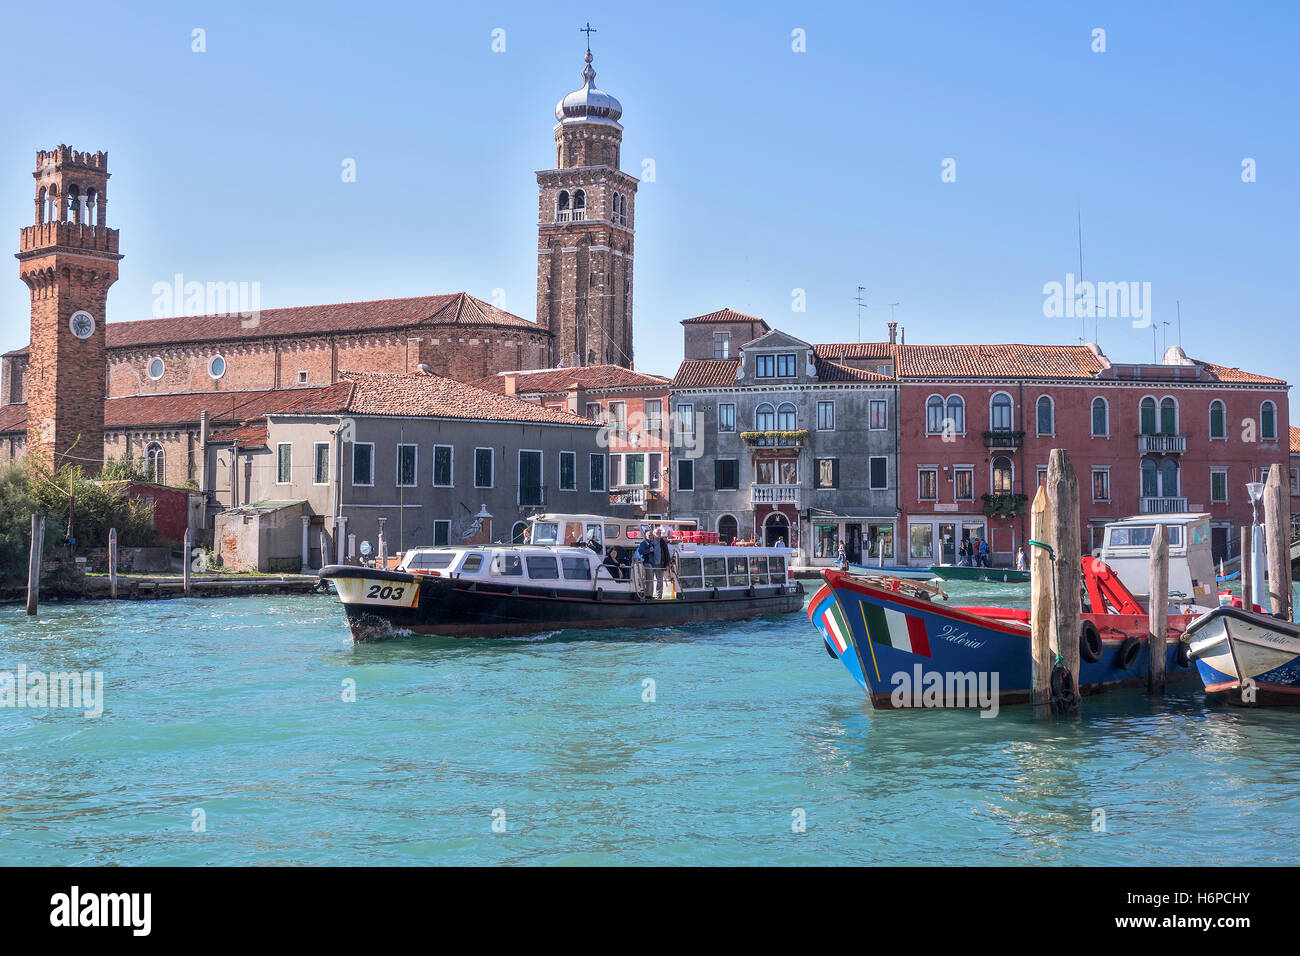 Water Bus Passing Along The Canal At Murano Venice Italy Stock Photo